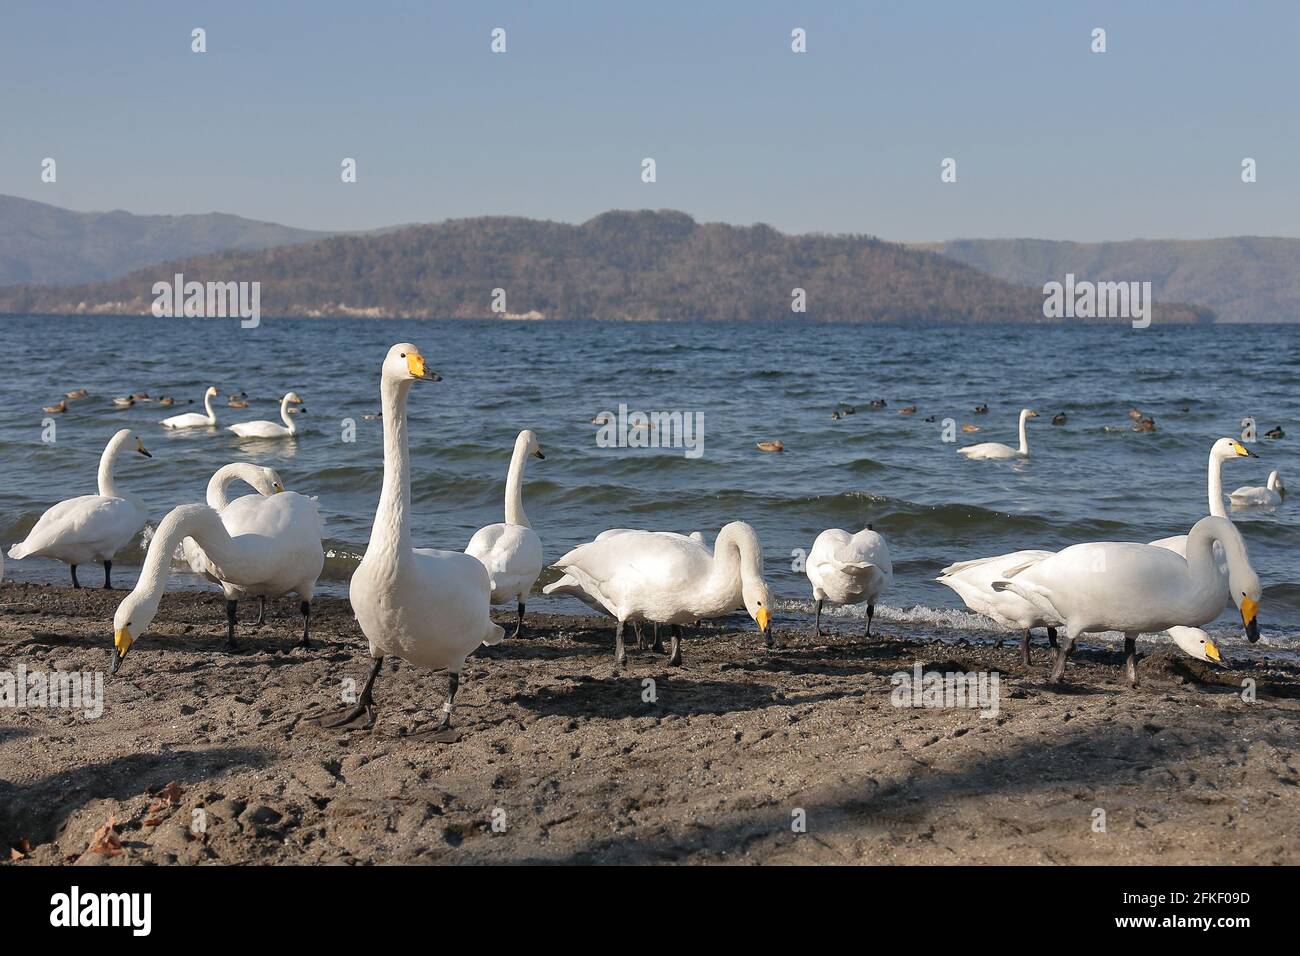 many beautiful white swans standing by a lake in the winter. Stock Photo